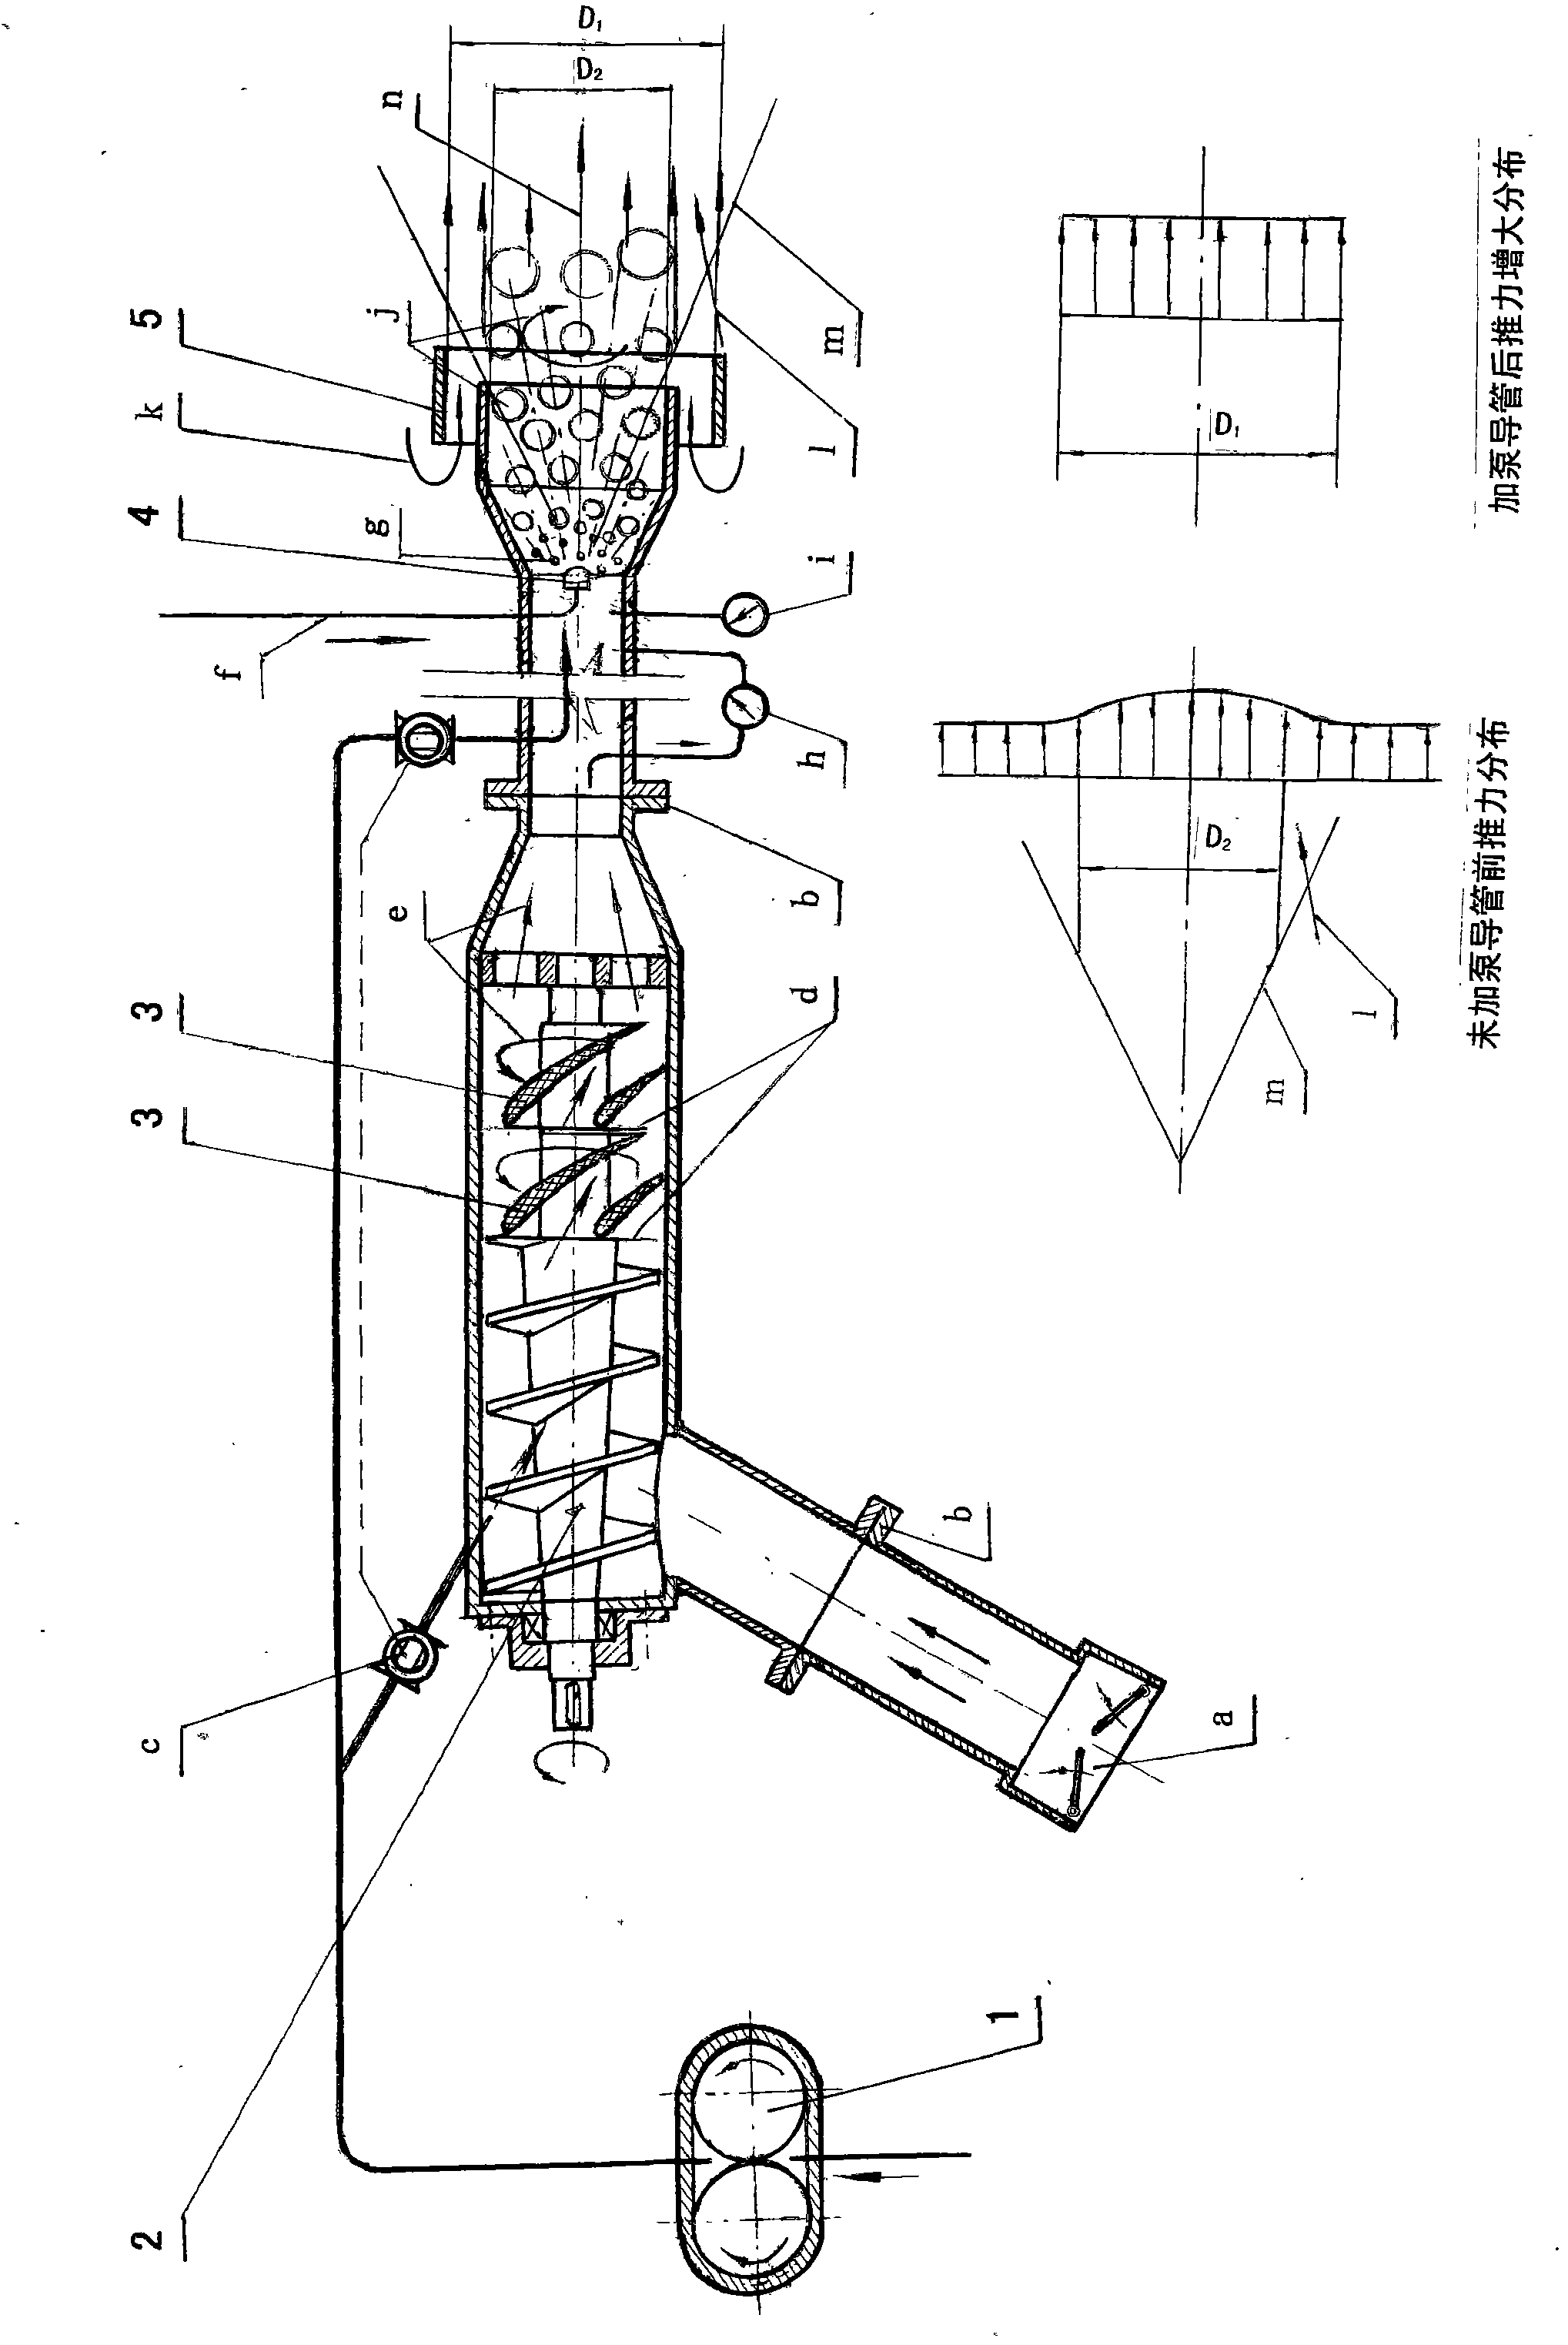 Pump-jet water propeller system for five-element combined ship